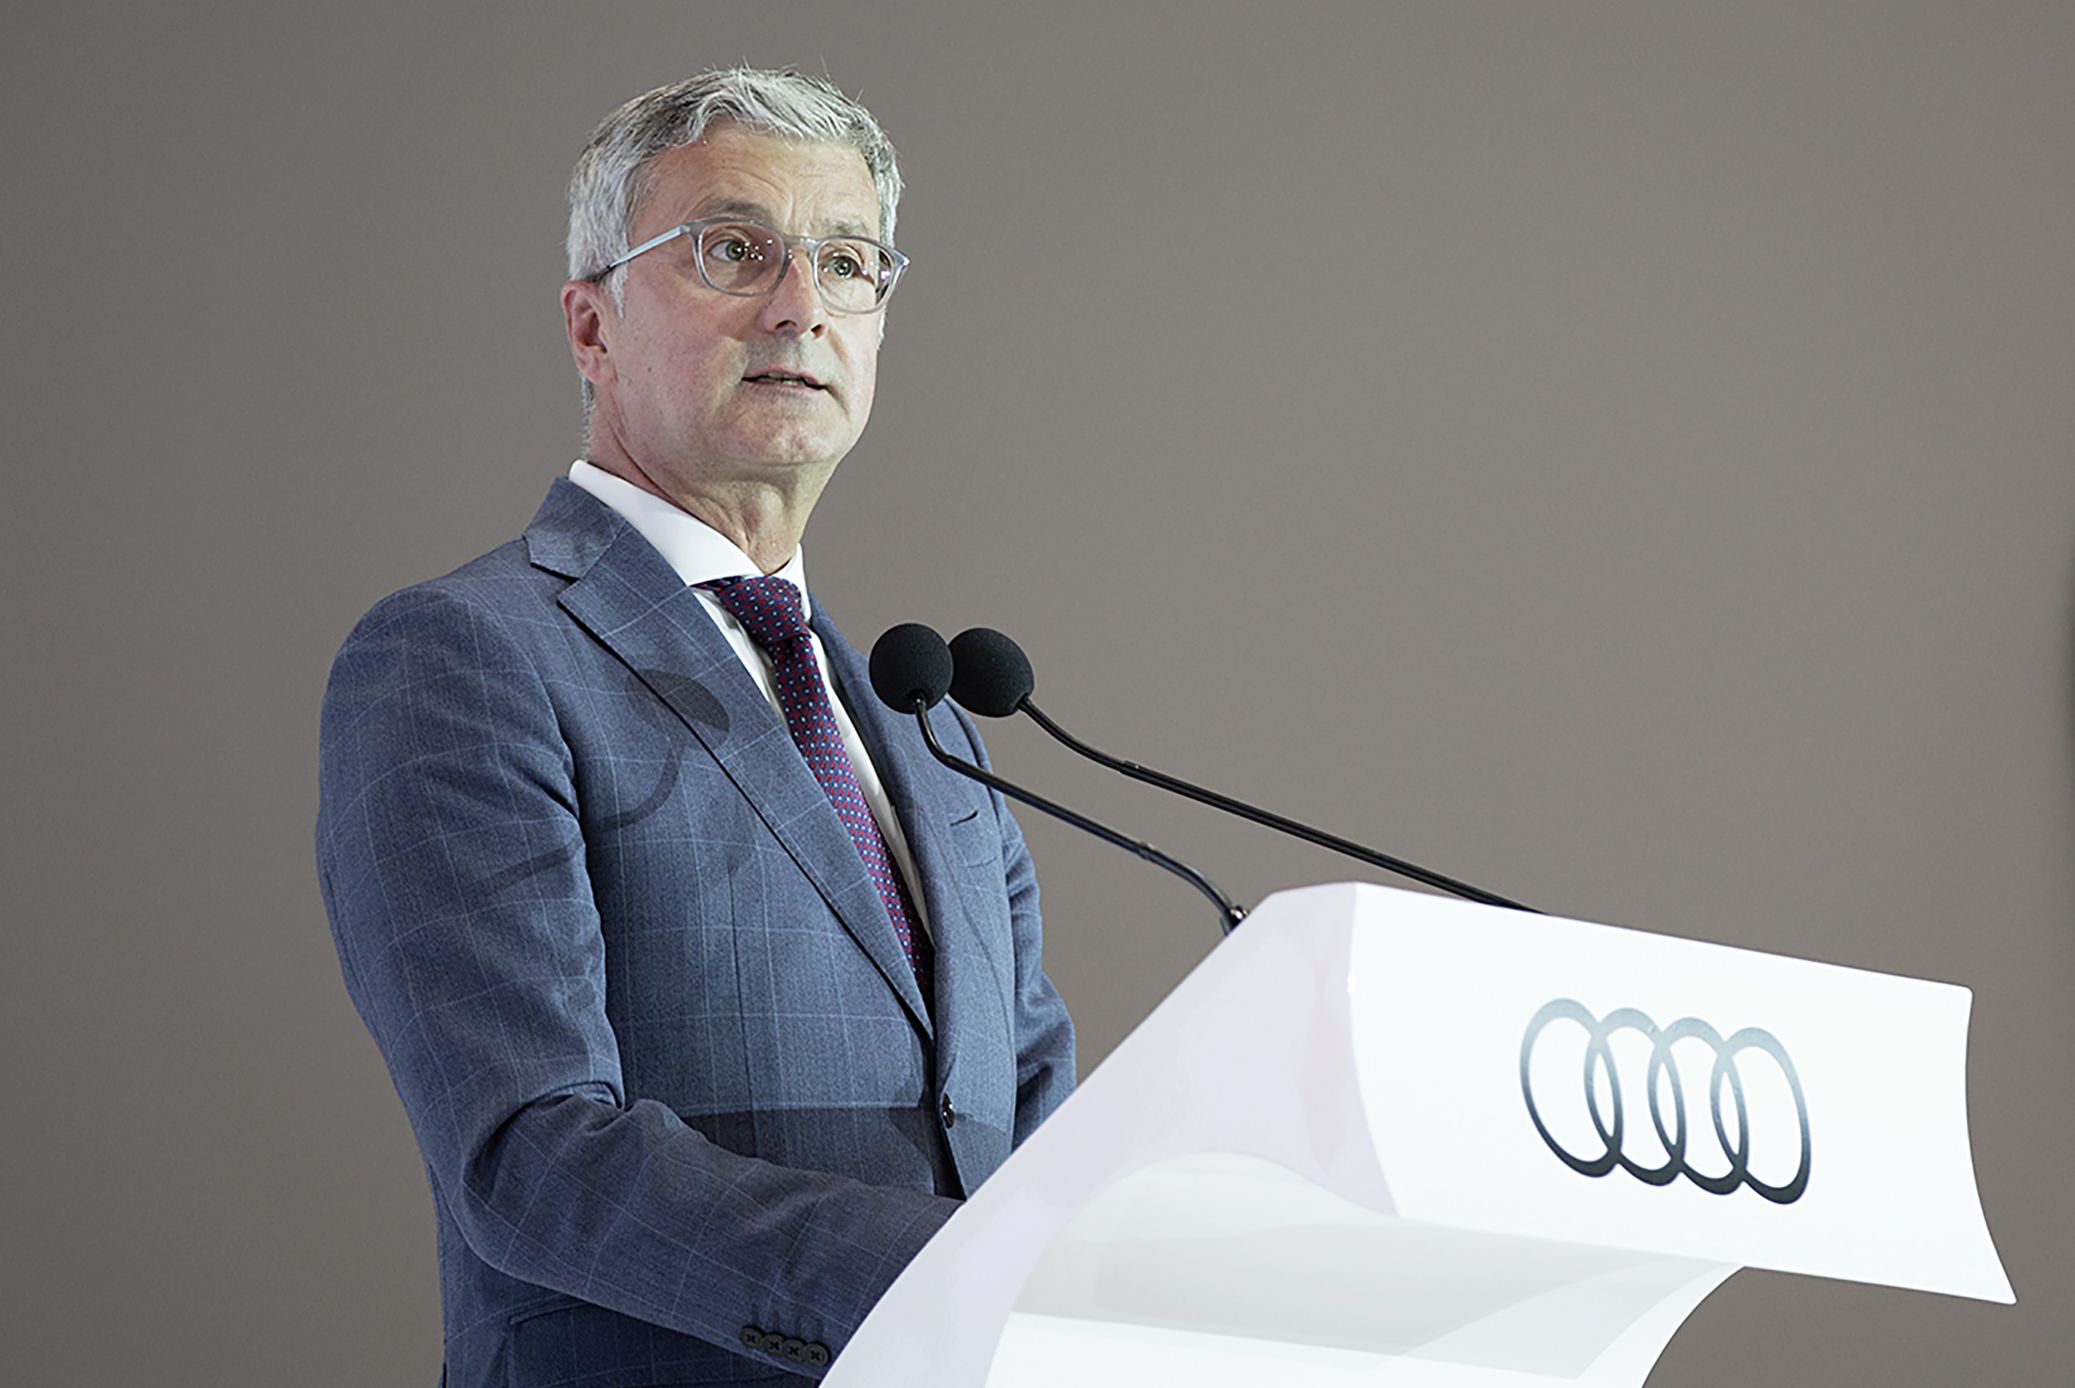 Audi under investigation for forging chassis number and test records to cheat South Korean authorities